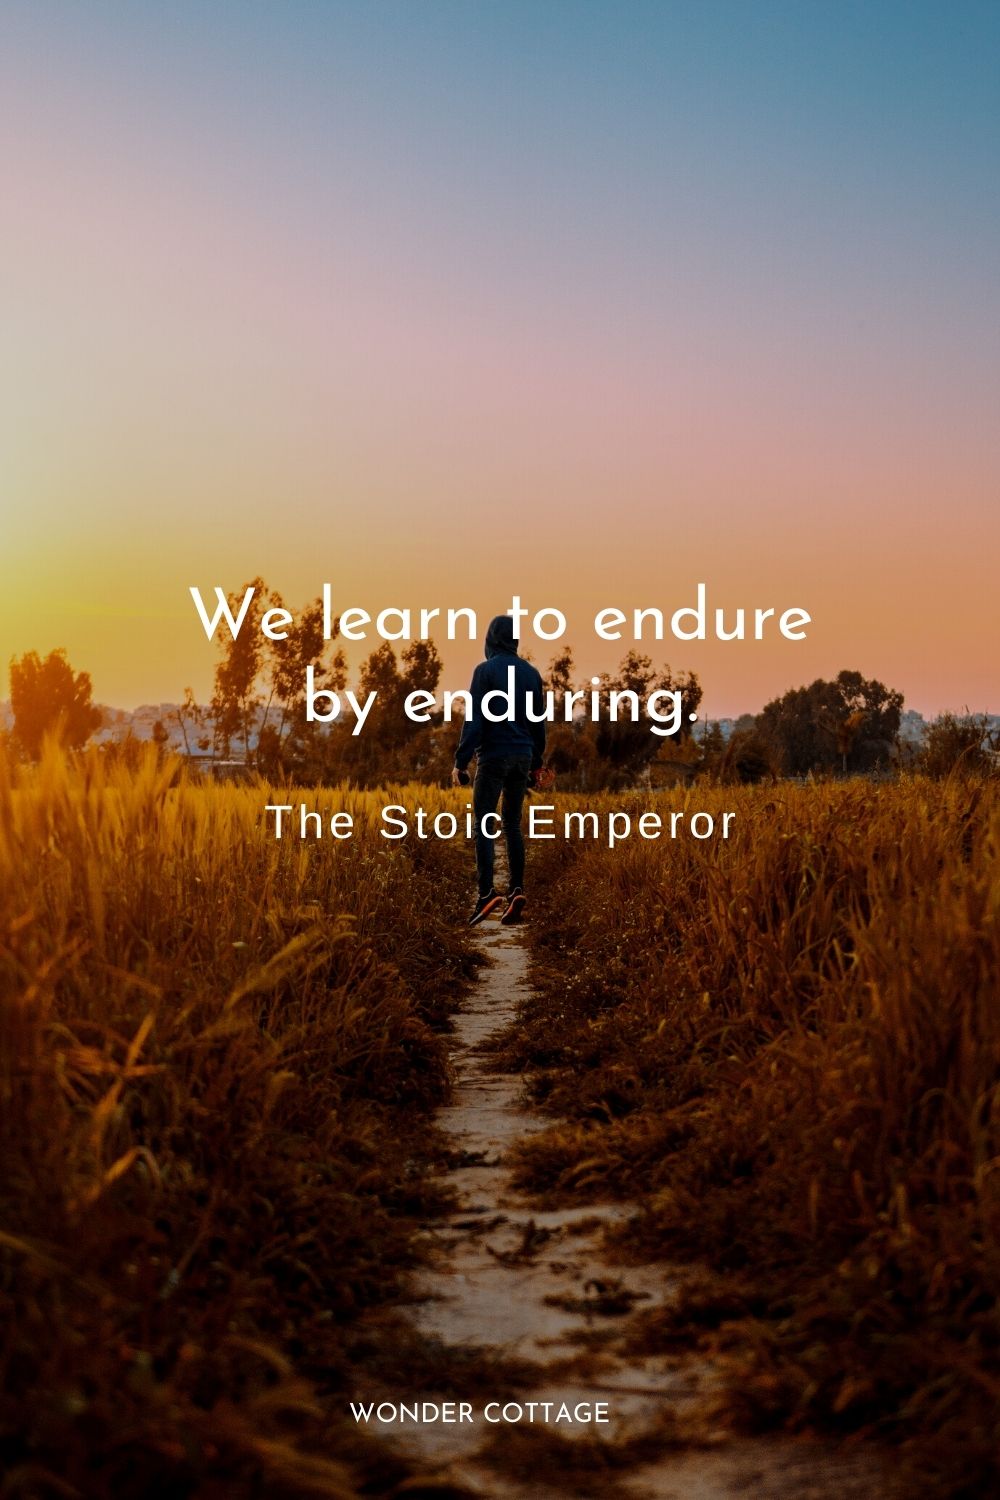 We learn to endure by enduring. The Stoic Emperor